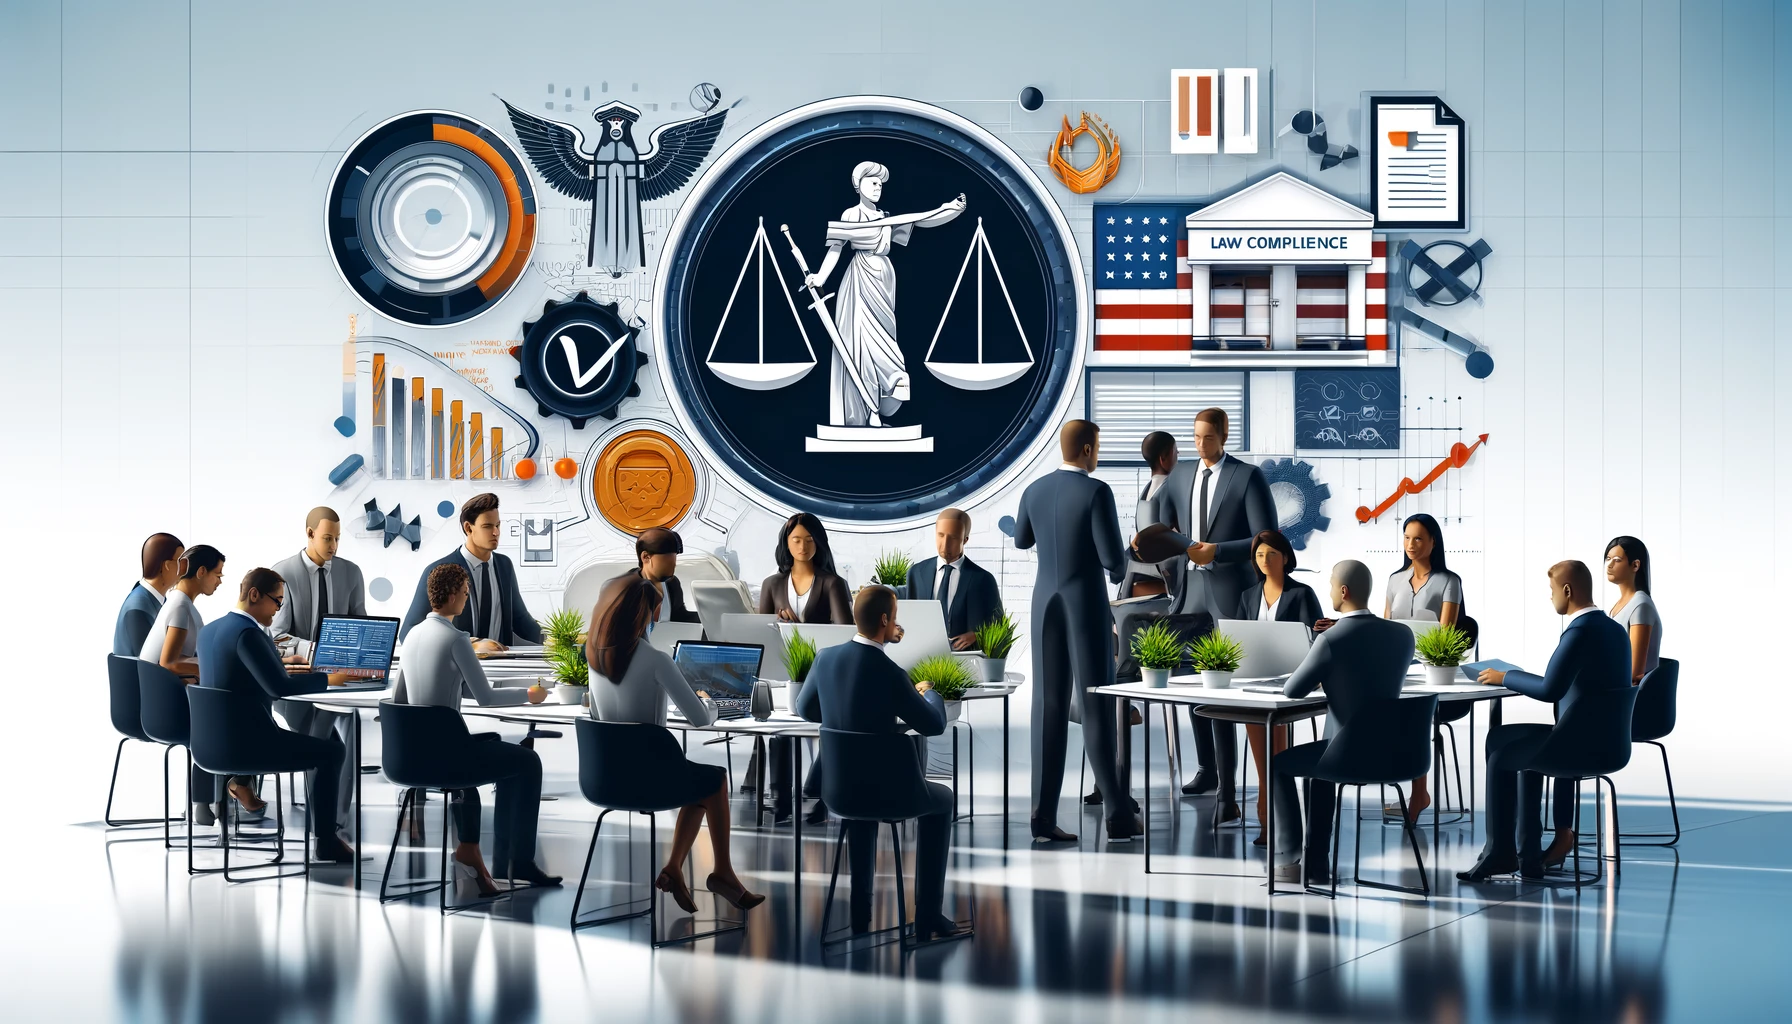 FTC Non-Compete Clause Ban: Key Impacts on U.S. Employment